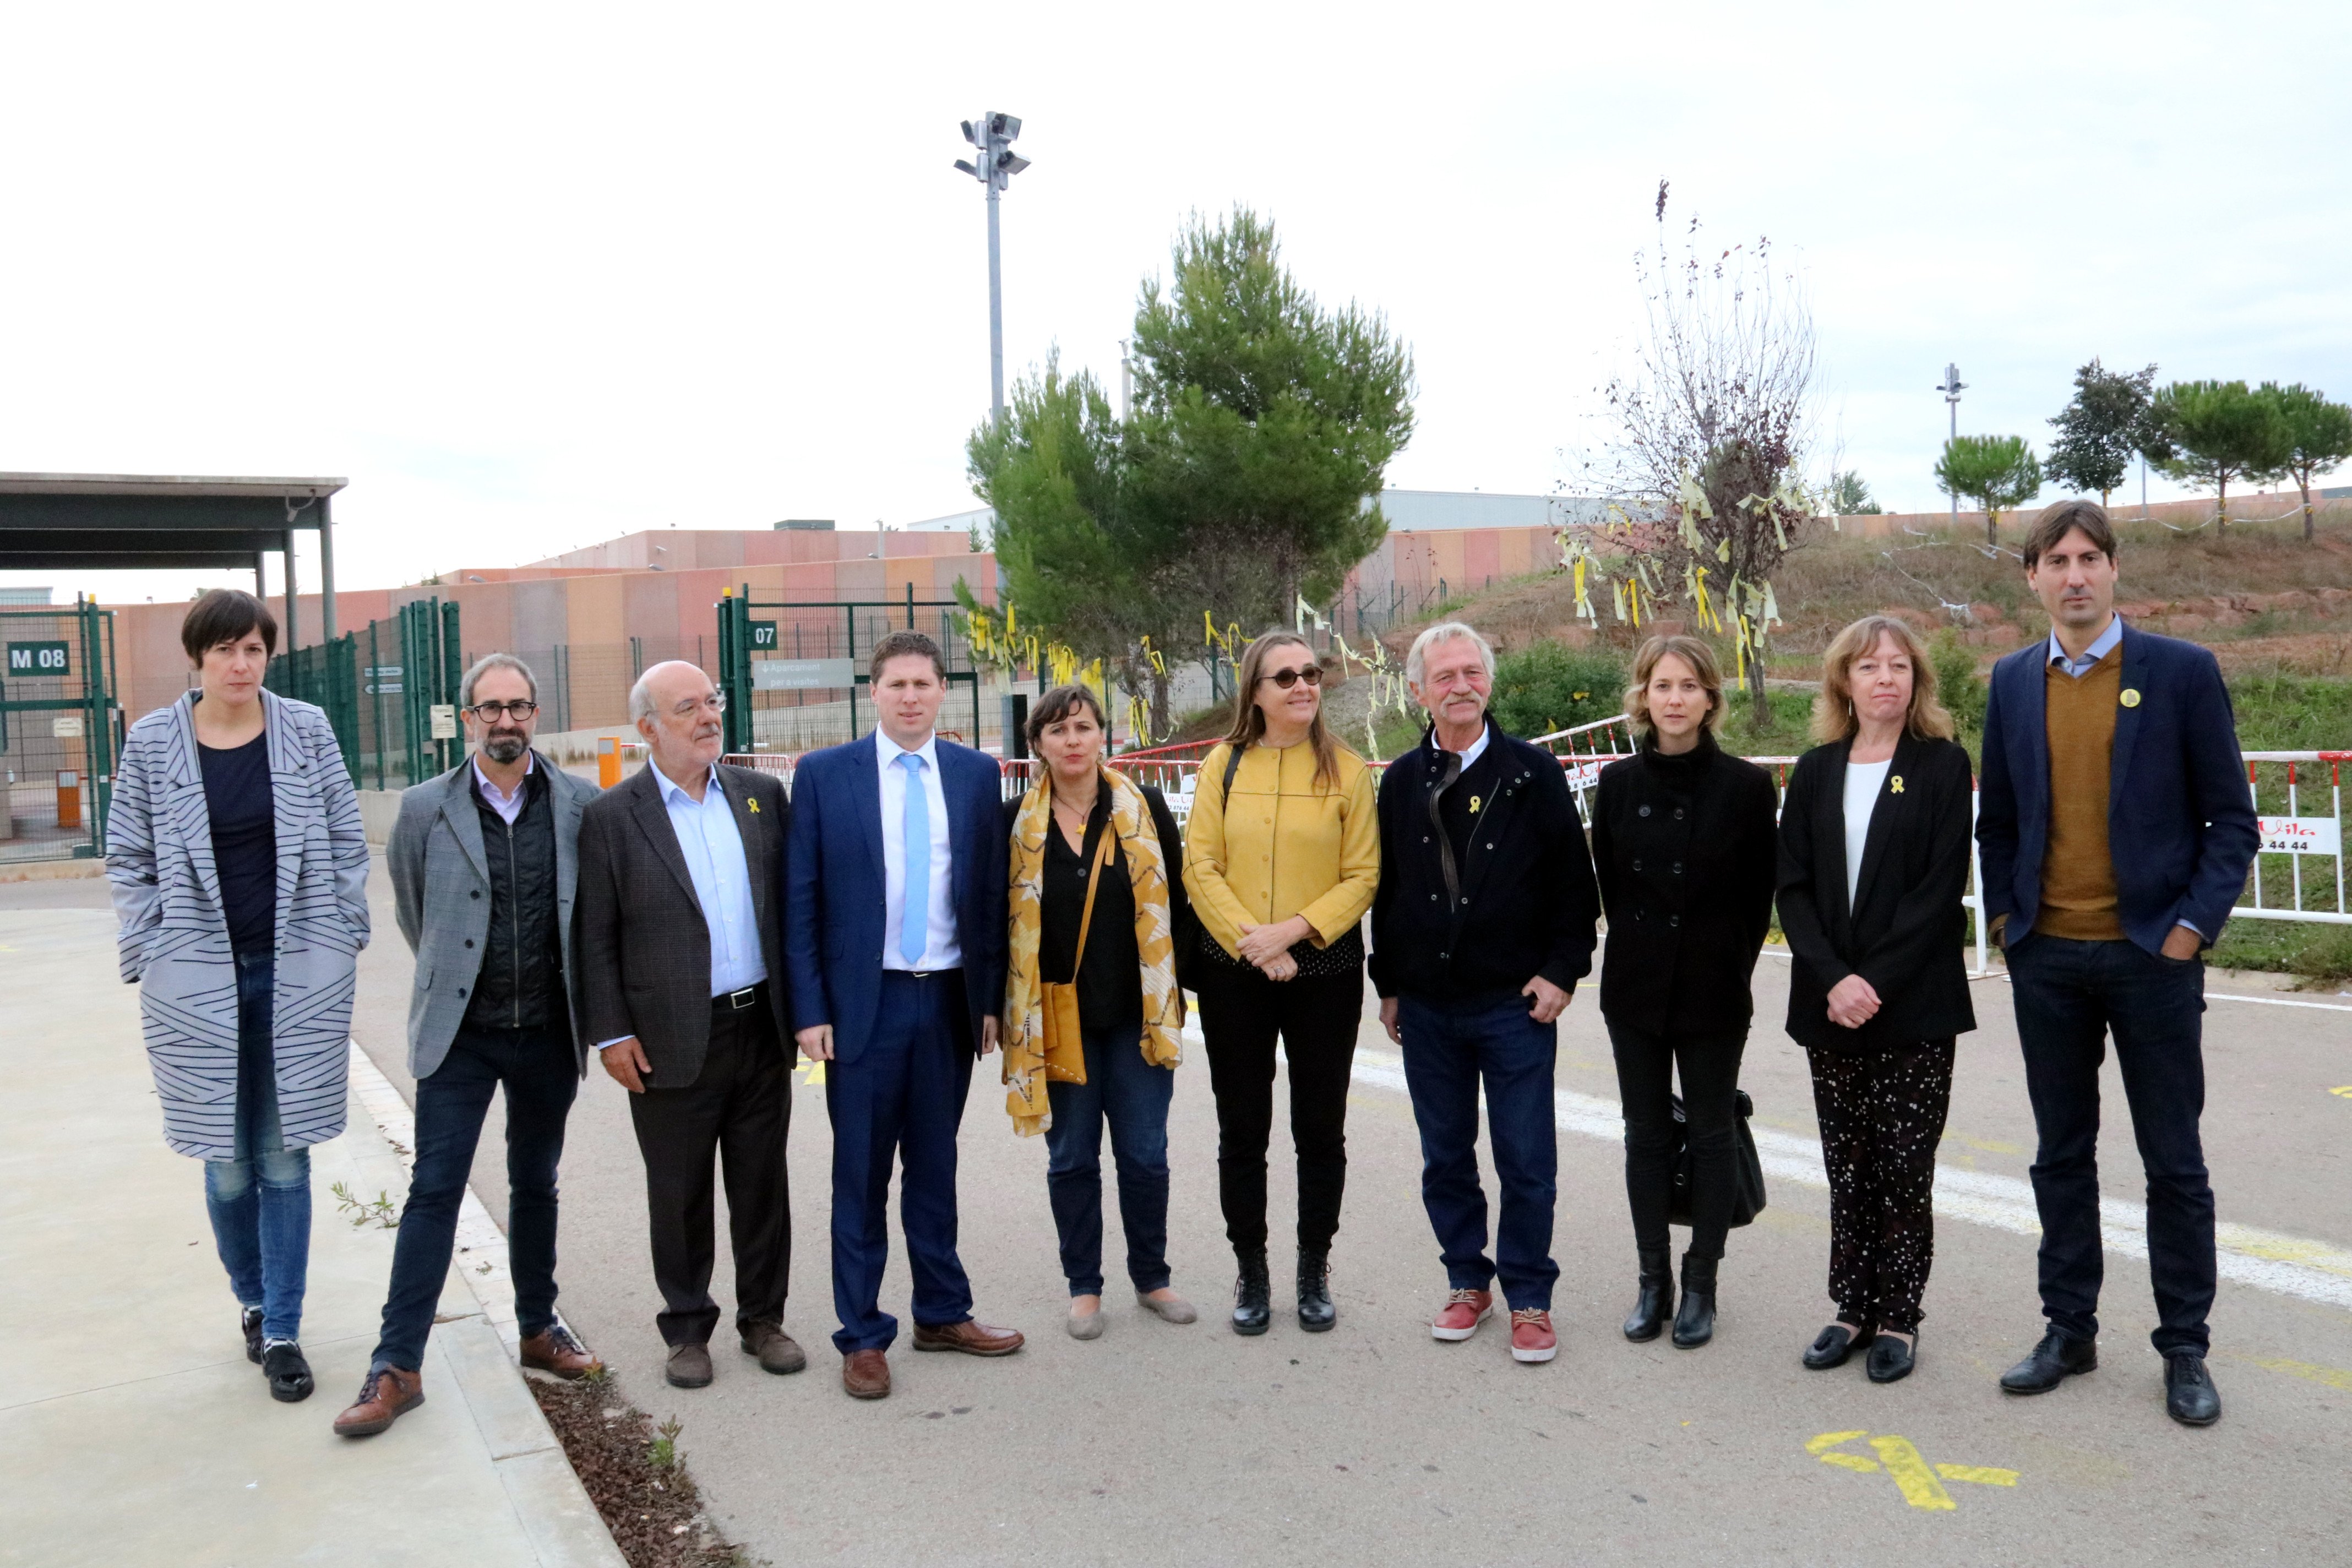 Nine MEPs ask to act as international observers during the Catalan referendum trial